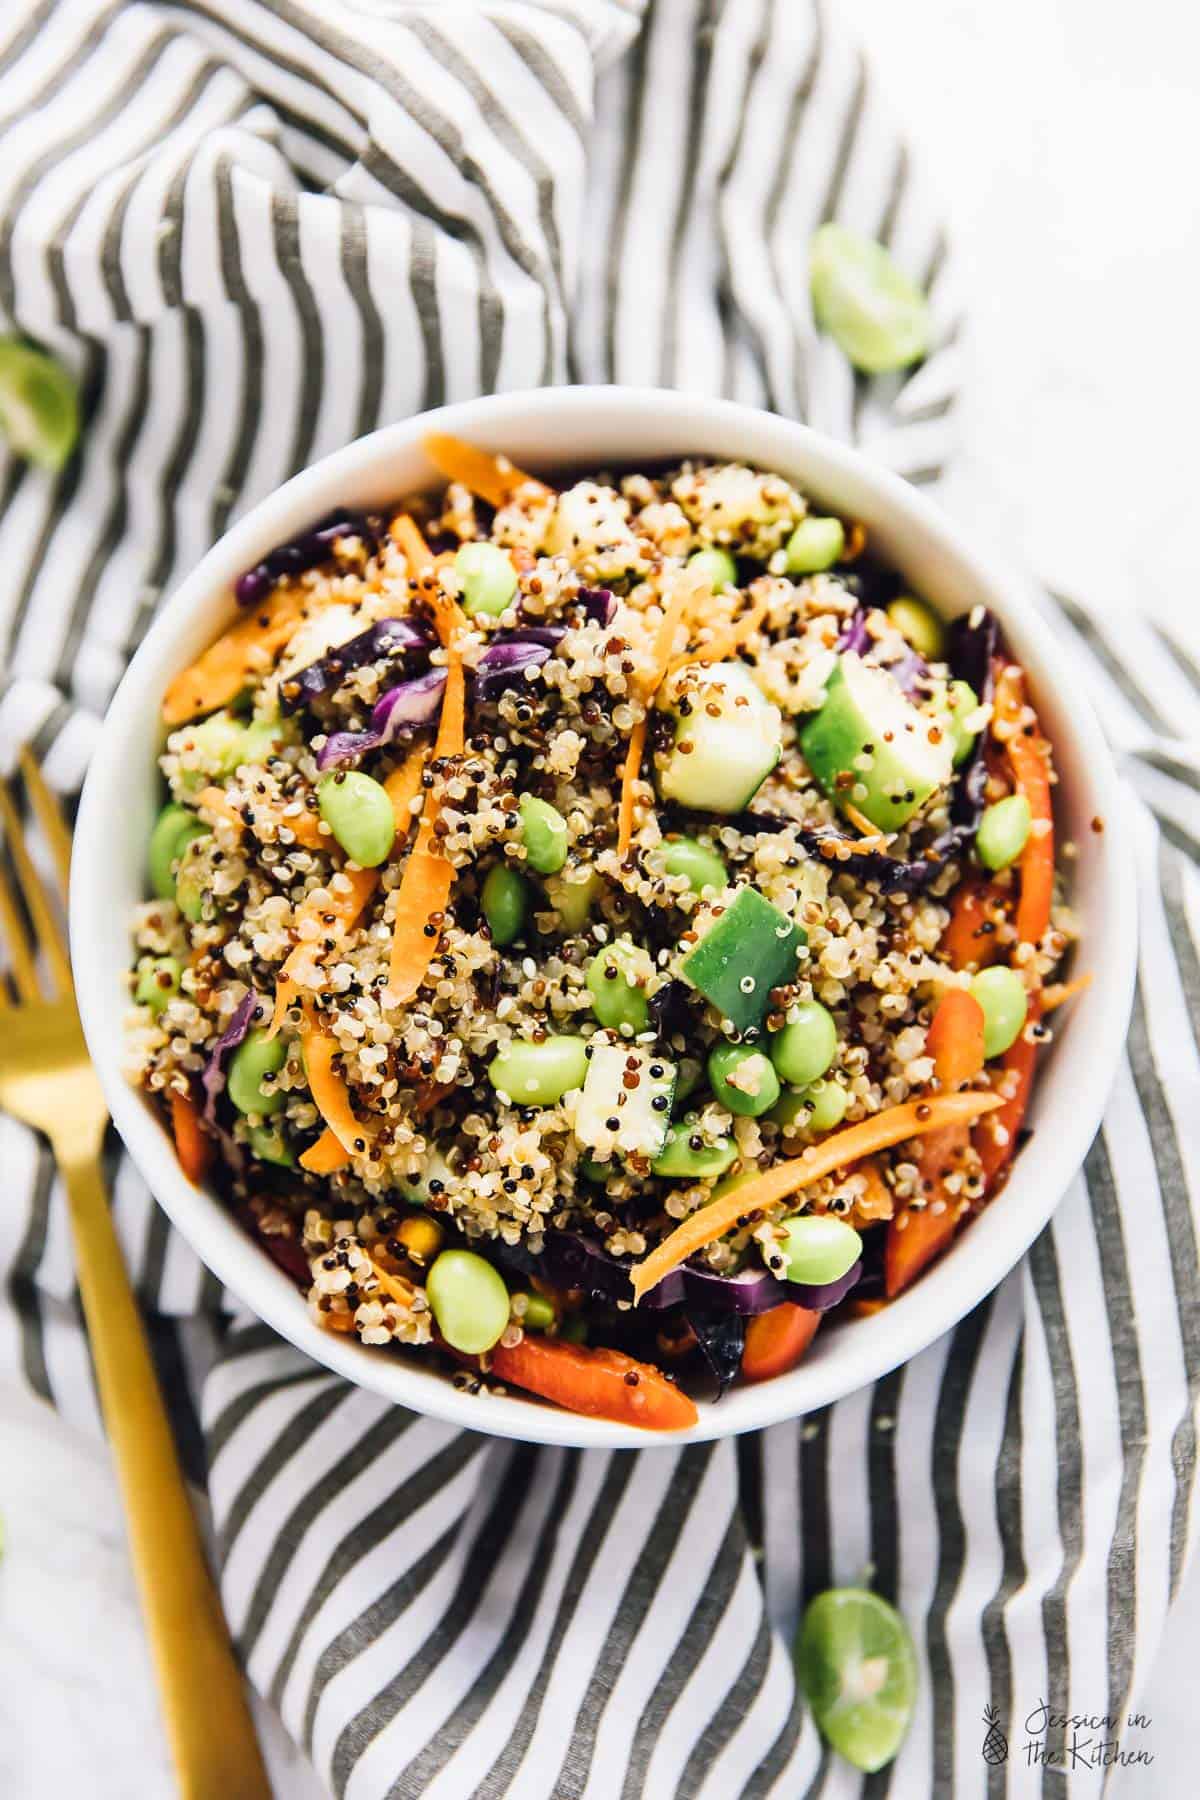 An Asian salad with cucumbers, quinoa, edamame, carrots, and red cabbage